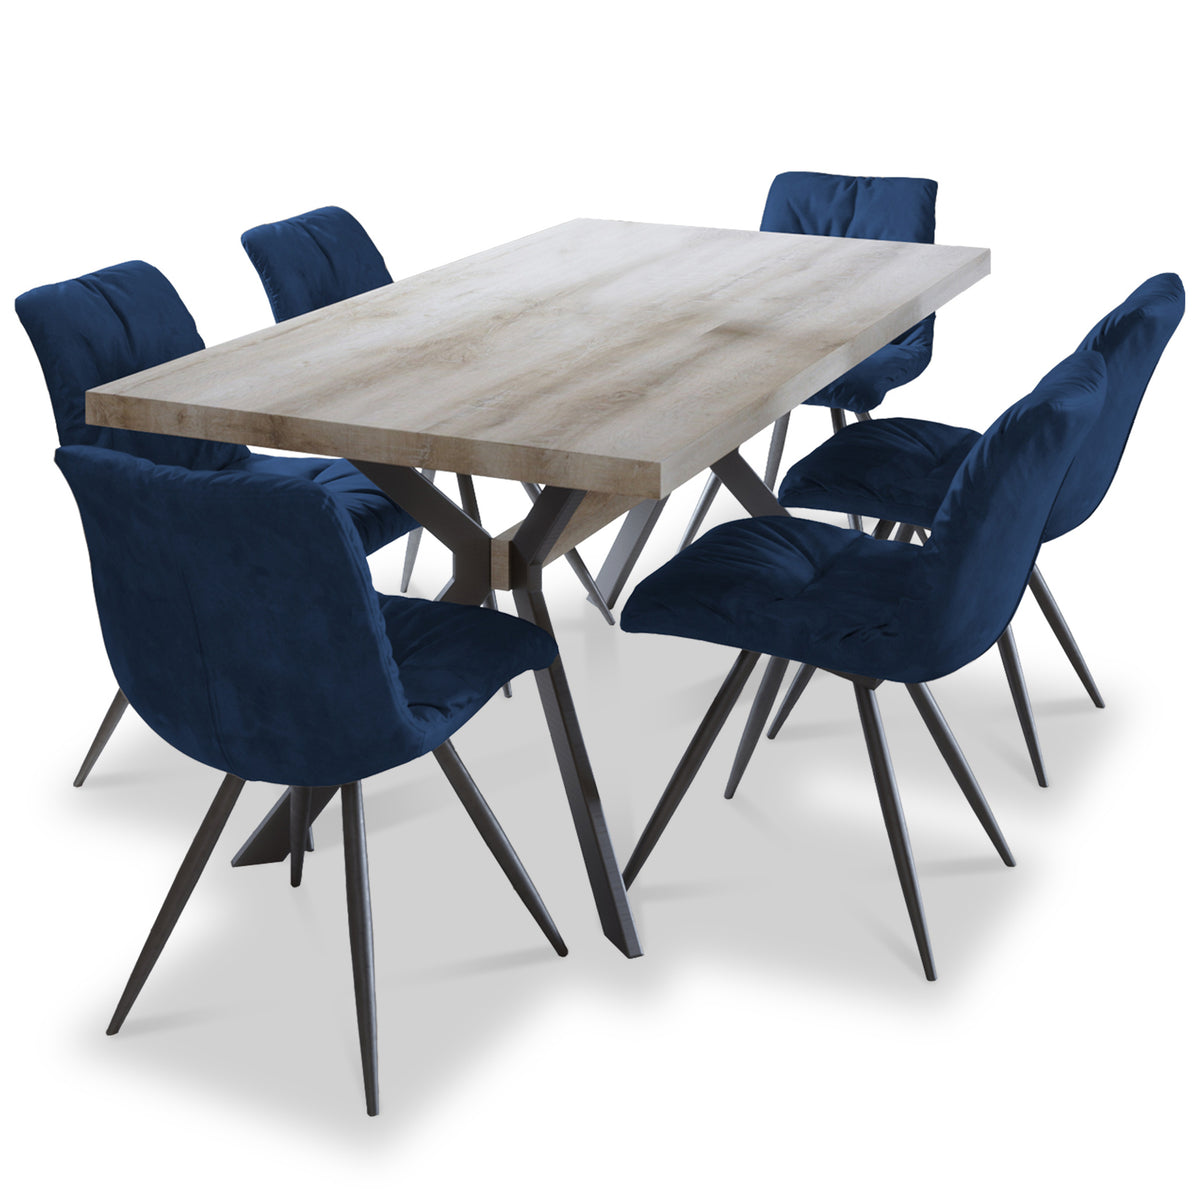 Allen 1.8m Dining Table with 6 Addison Blue Chairs